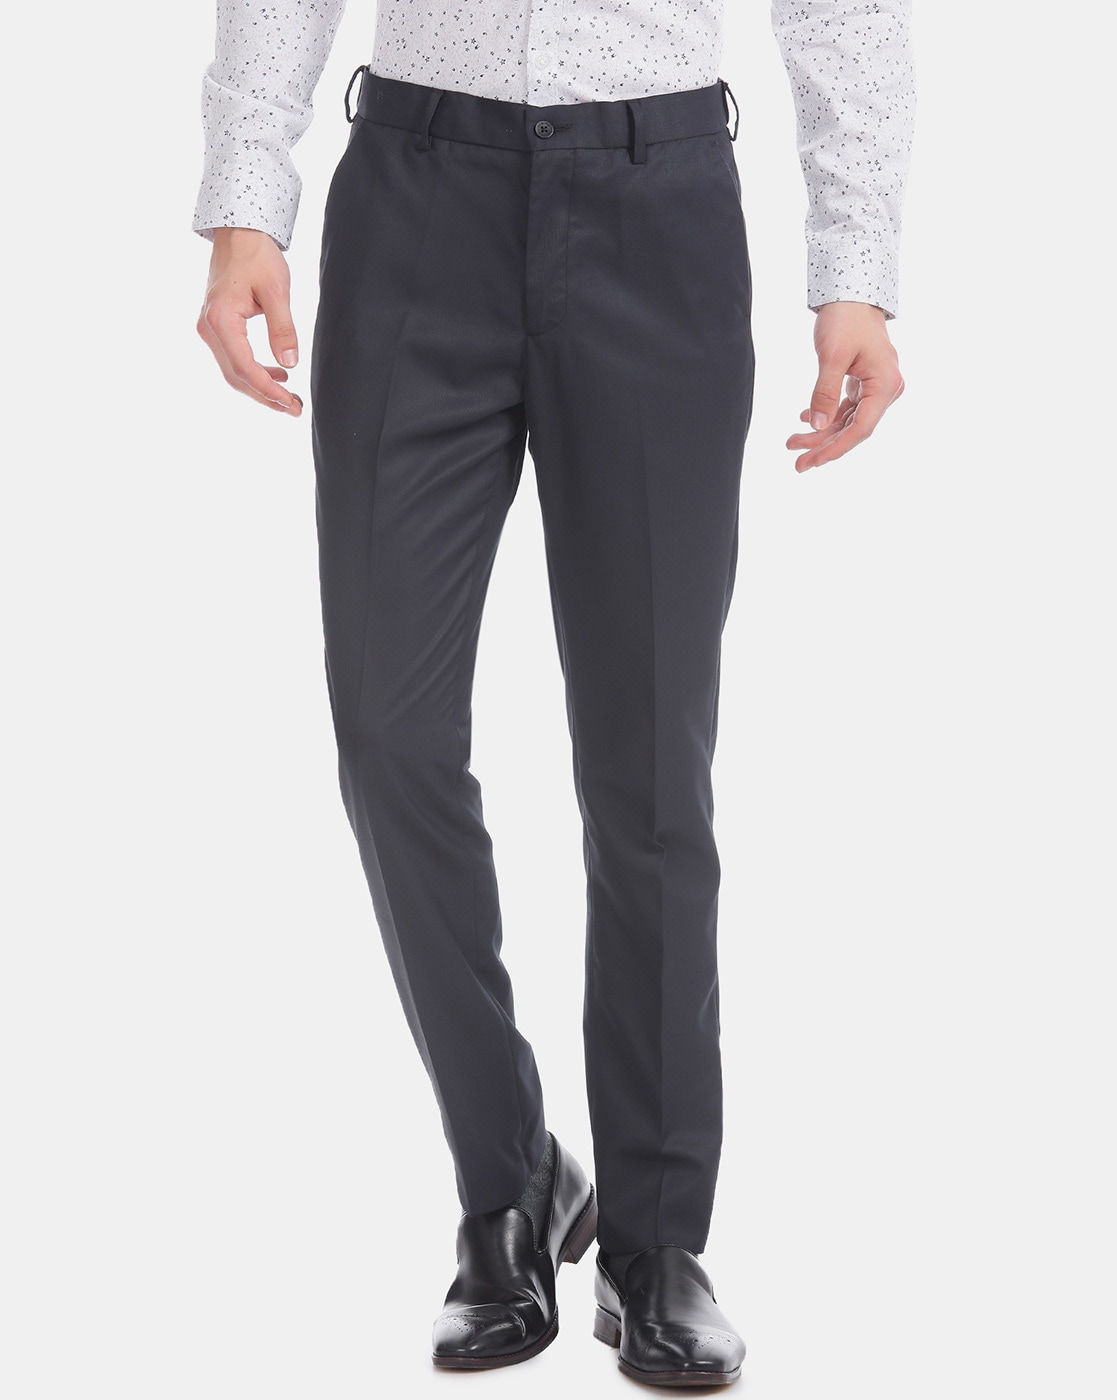 Buy Formal Trousers For Men At Best Prices Online From Nykaa Fashion